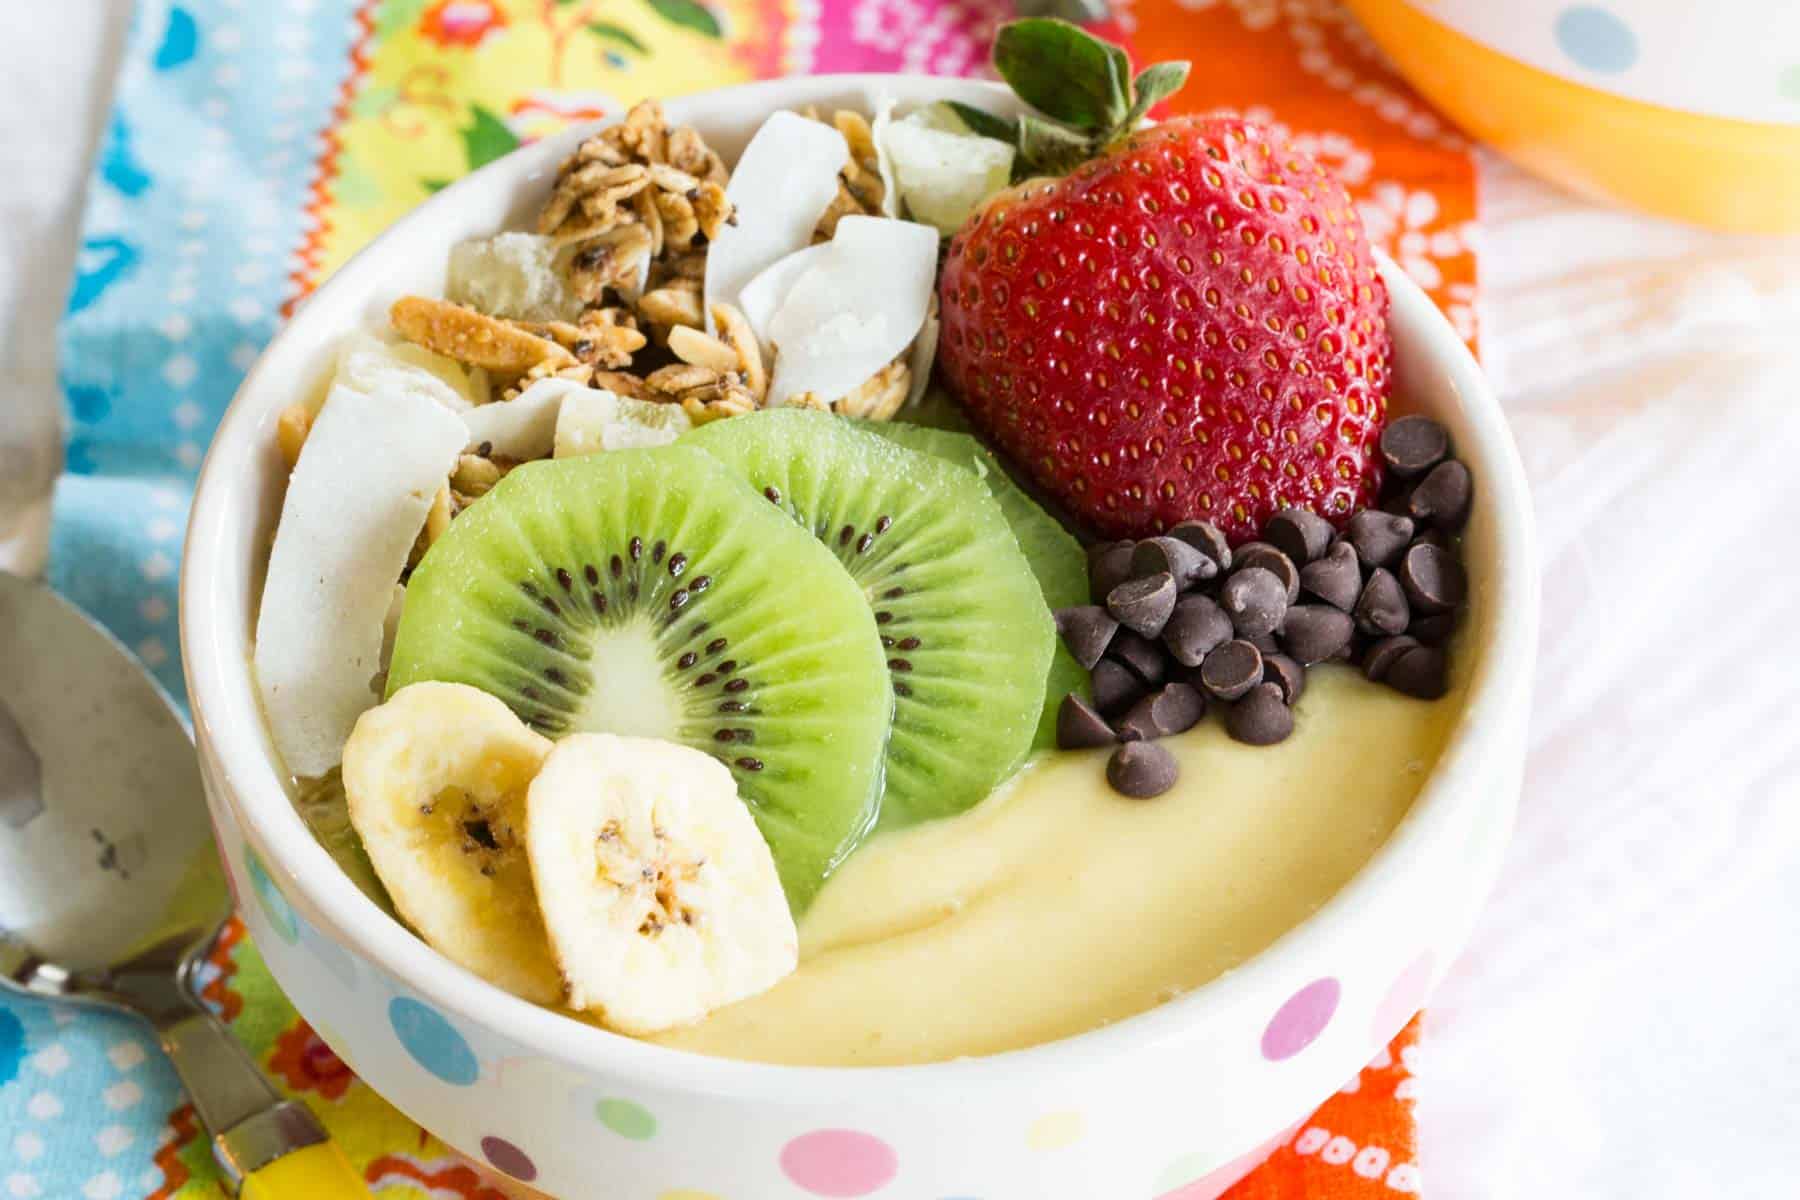 pink and white polka dot bowl filled with a thick pale yellow smoothie and fruit and granola on top